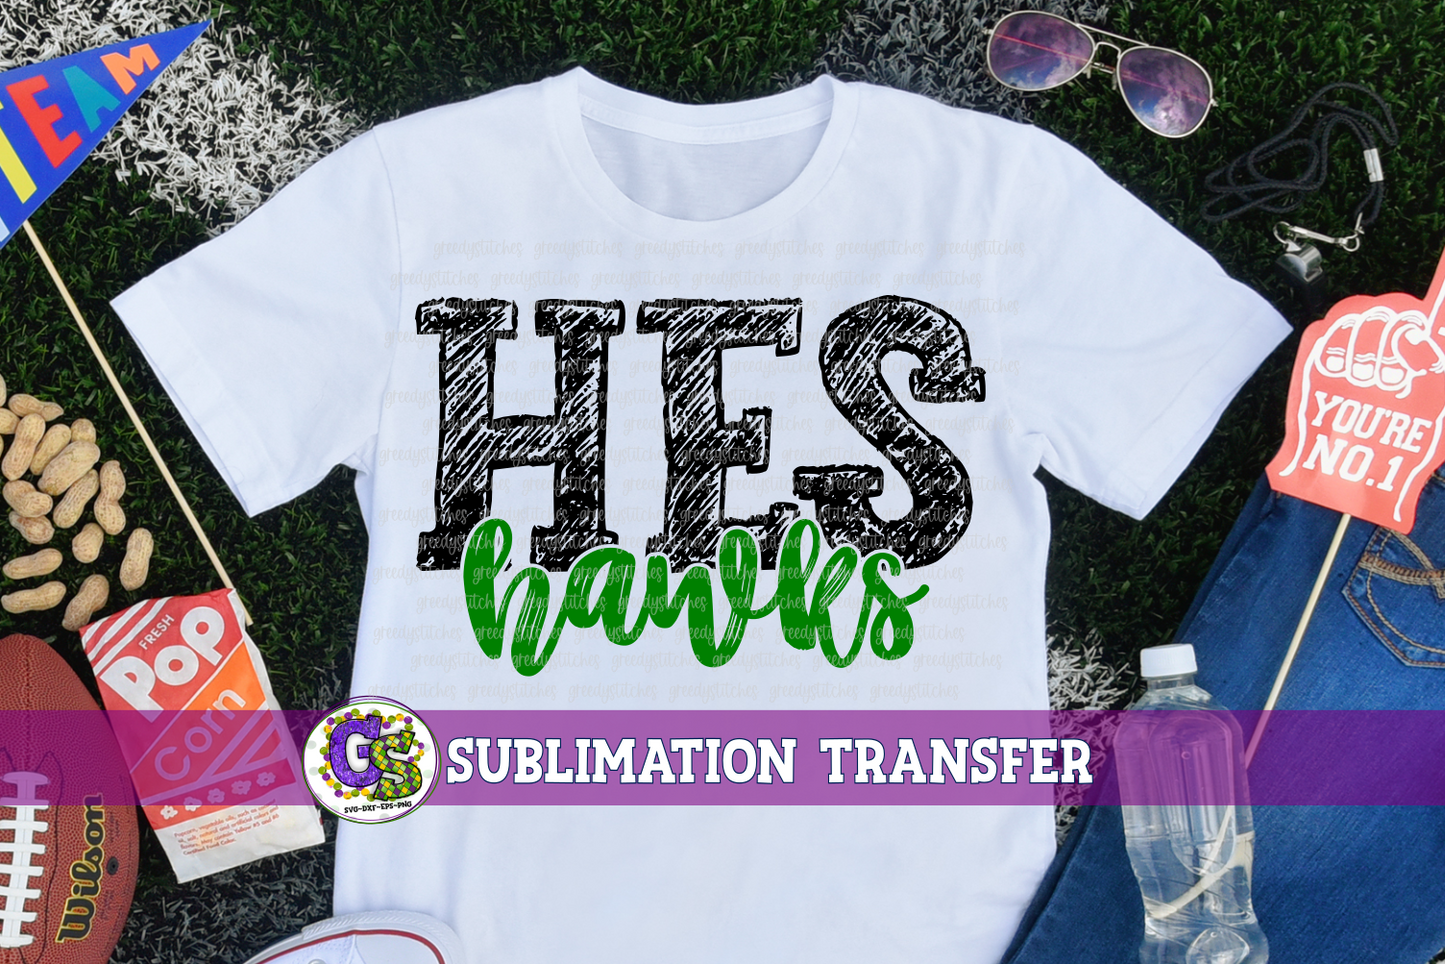 HES Hawks Sublimation Transfer